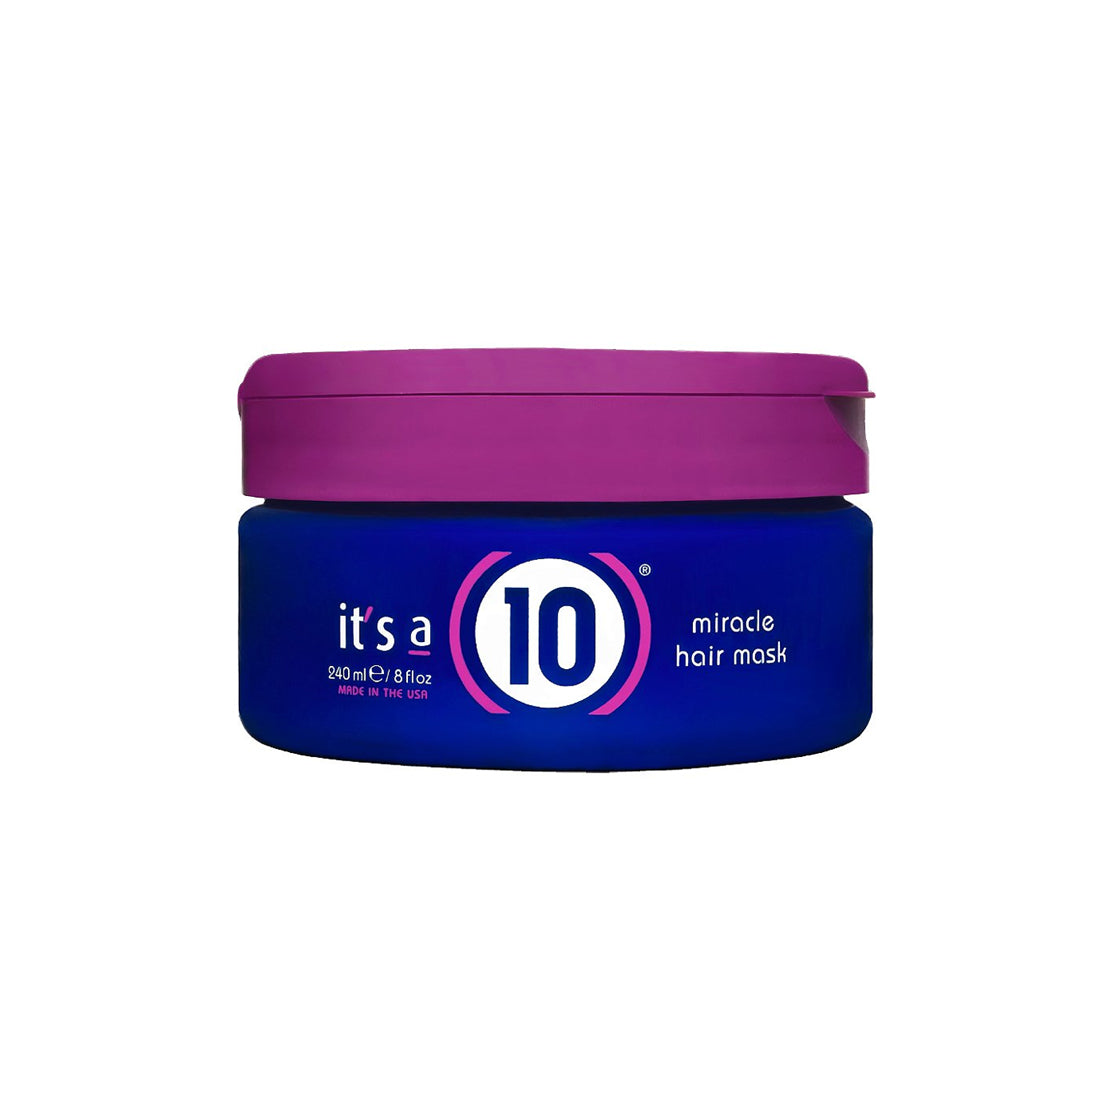 It's A 10 Miracle Hair Mask 240ml